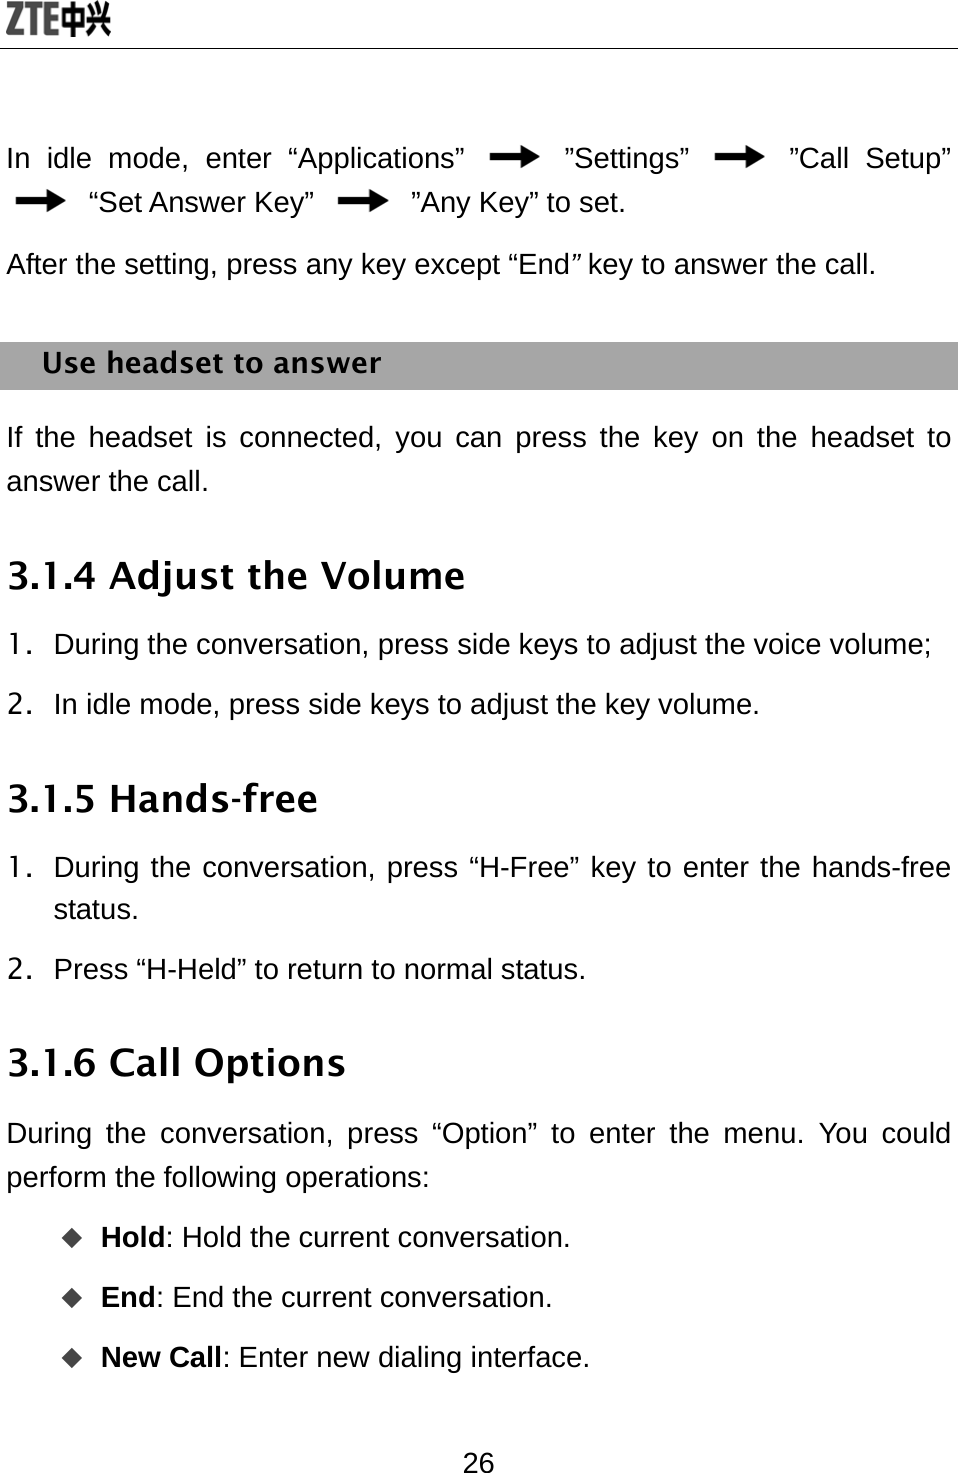  26 In idle mode, enter “Applications”   ”Settings”   ”Call Setup”  “Set Answer Key”    ”Any Key” to set. After the setting, press any key except “End” key to answer the call. Use headset to answer If the headset is connected, you can press the key on the headset to answer the call. 3.1.4 Adjust the Volume 1.  During the conversation, press side keys to adjust the voice volume; 2.  In idle mode, press side keys to adjust the key volume.   3.1.5 Hands-free   1.  During the conversation, press “H-Free” key to enter the hands-free status. 2.  Press “H-Held” to return to normal status.   3.1.6 Call Options During the conversation, press “Option” to enter the menu. You could perform the following operations:  Hold: Hold the current conversation.  End: End the current conversation.    New Call: Enter new dialing interface. 